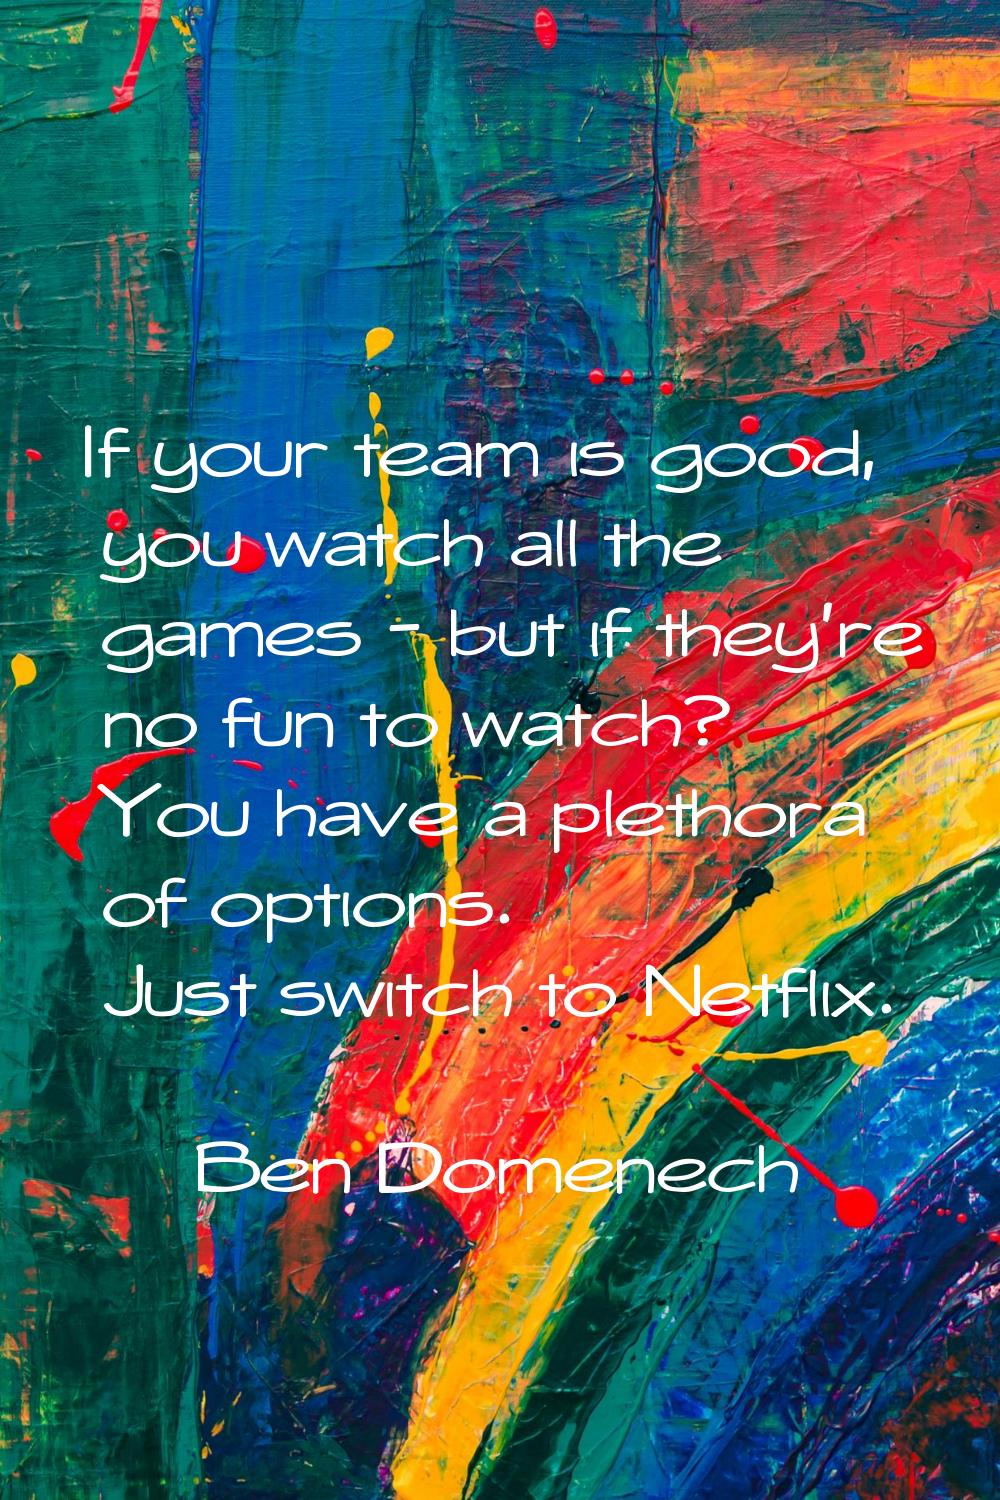 If your team is good, you watch all the games - but if they're no fun to watch? You have a plethora